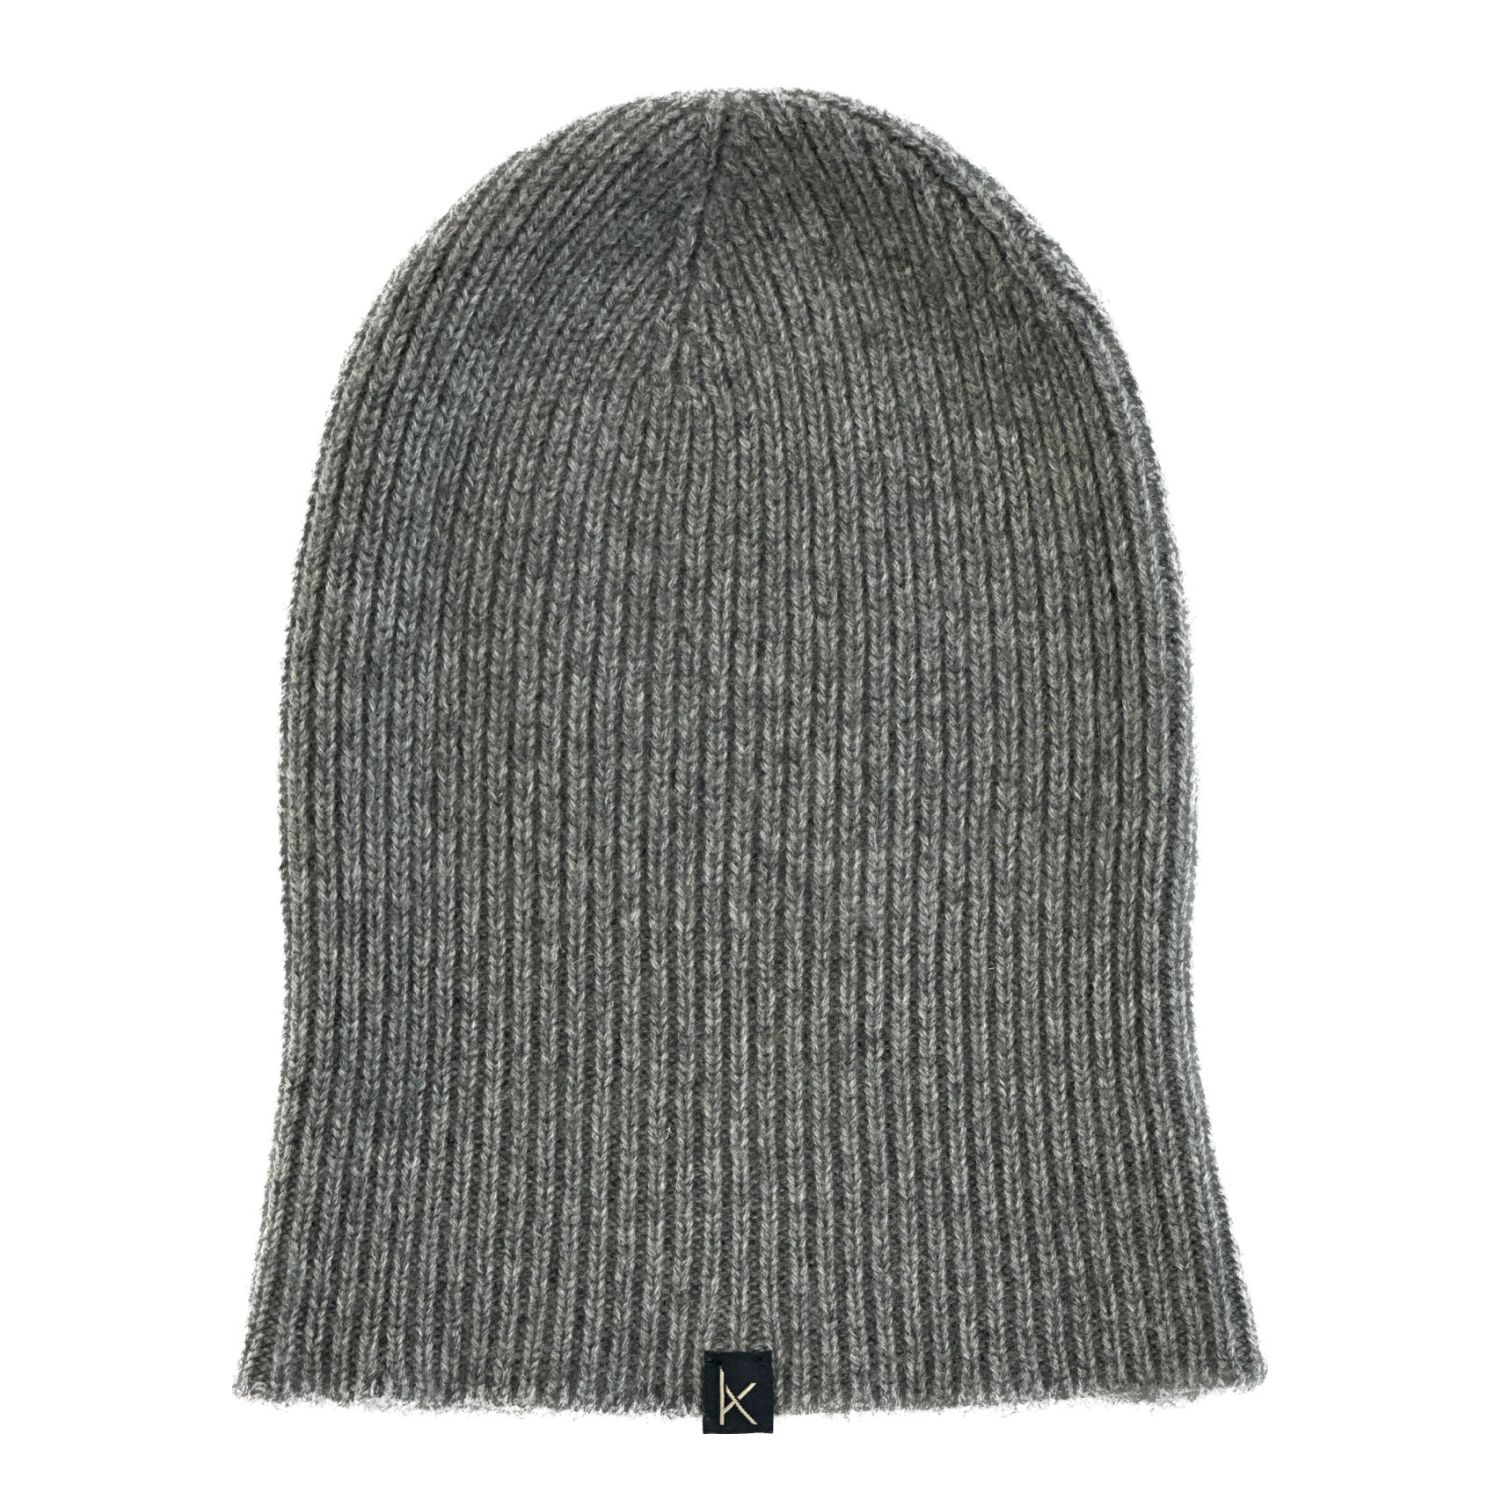 Mid Grey Deluxe Knitted Cashmere Beanie Hat